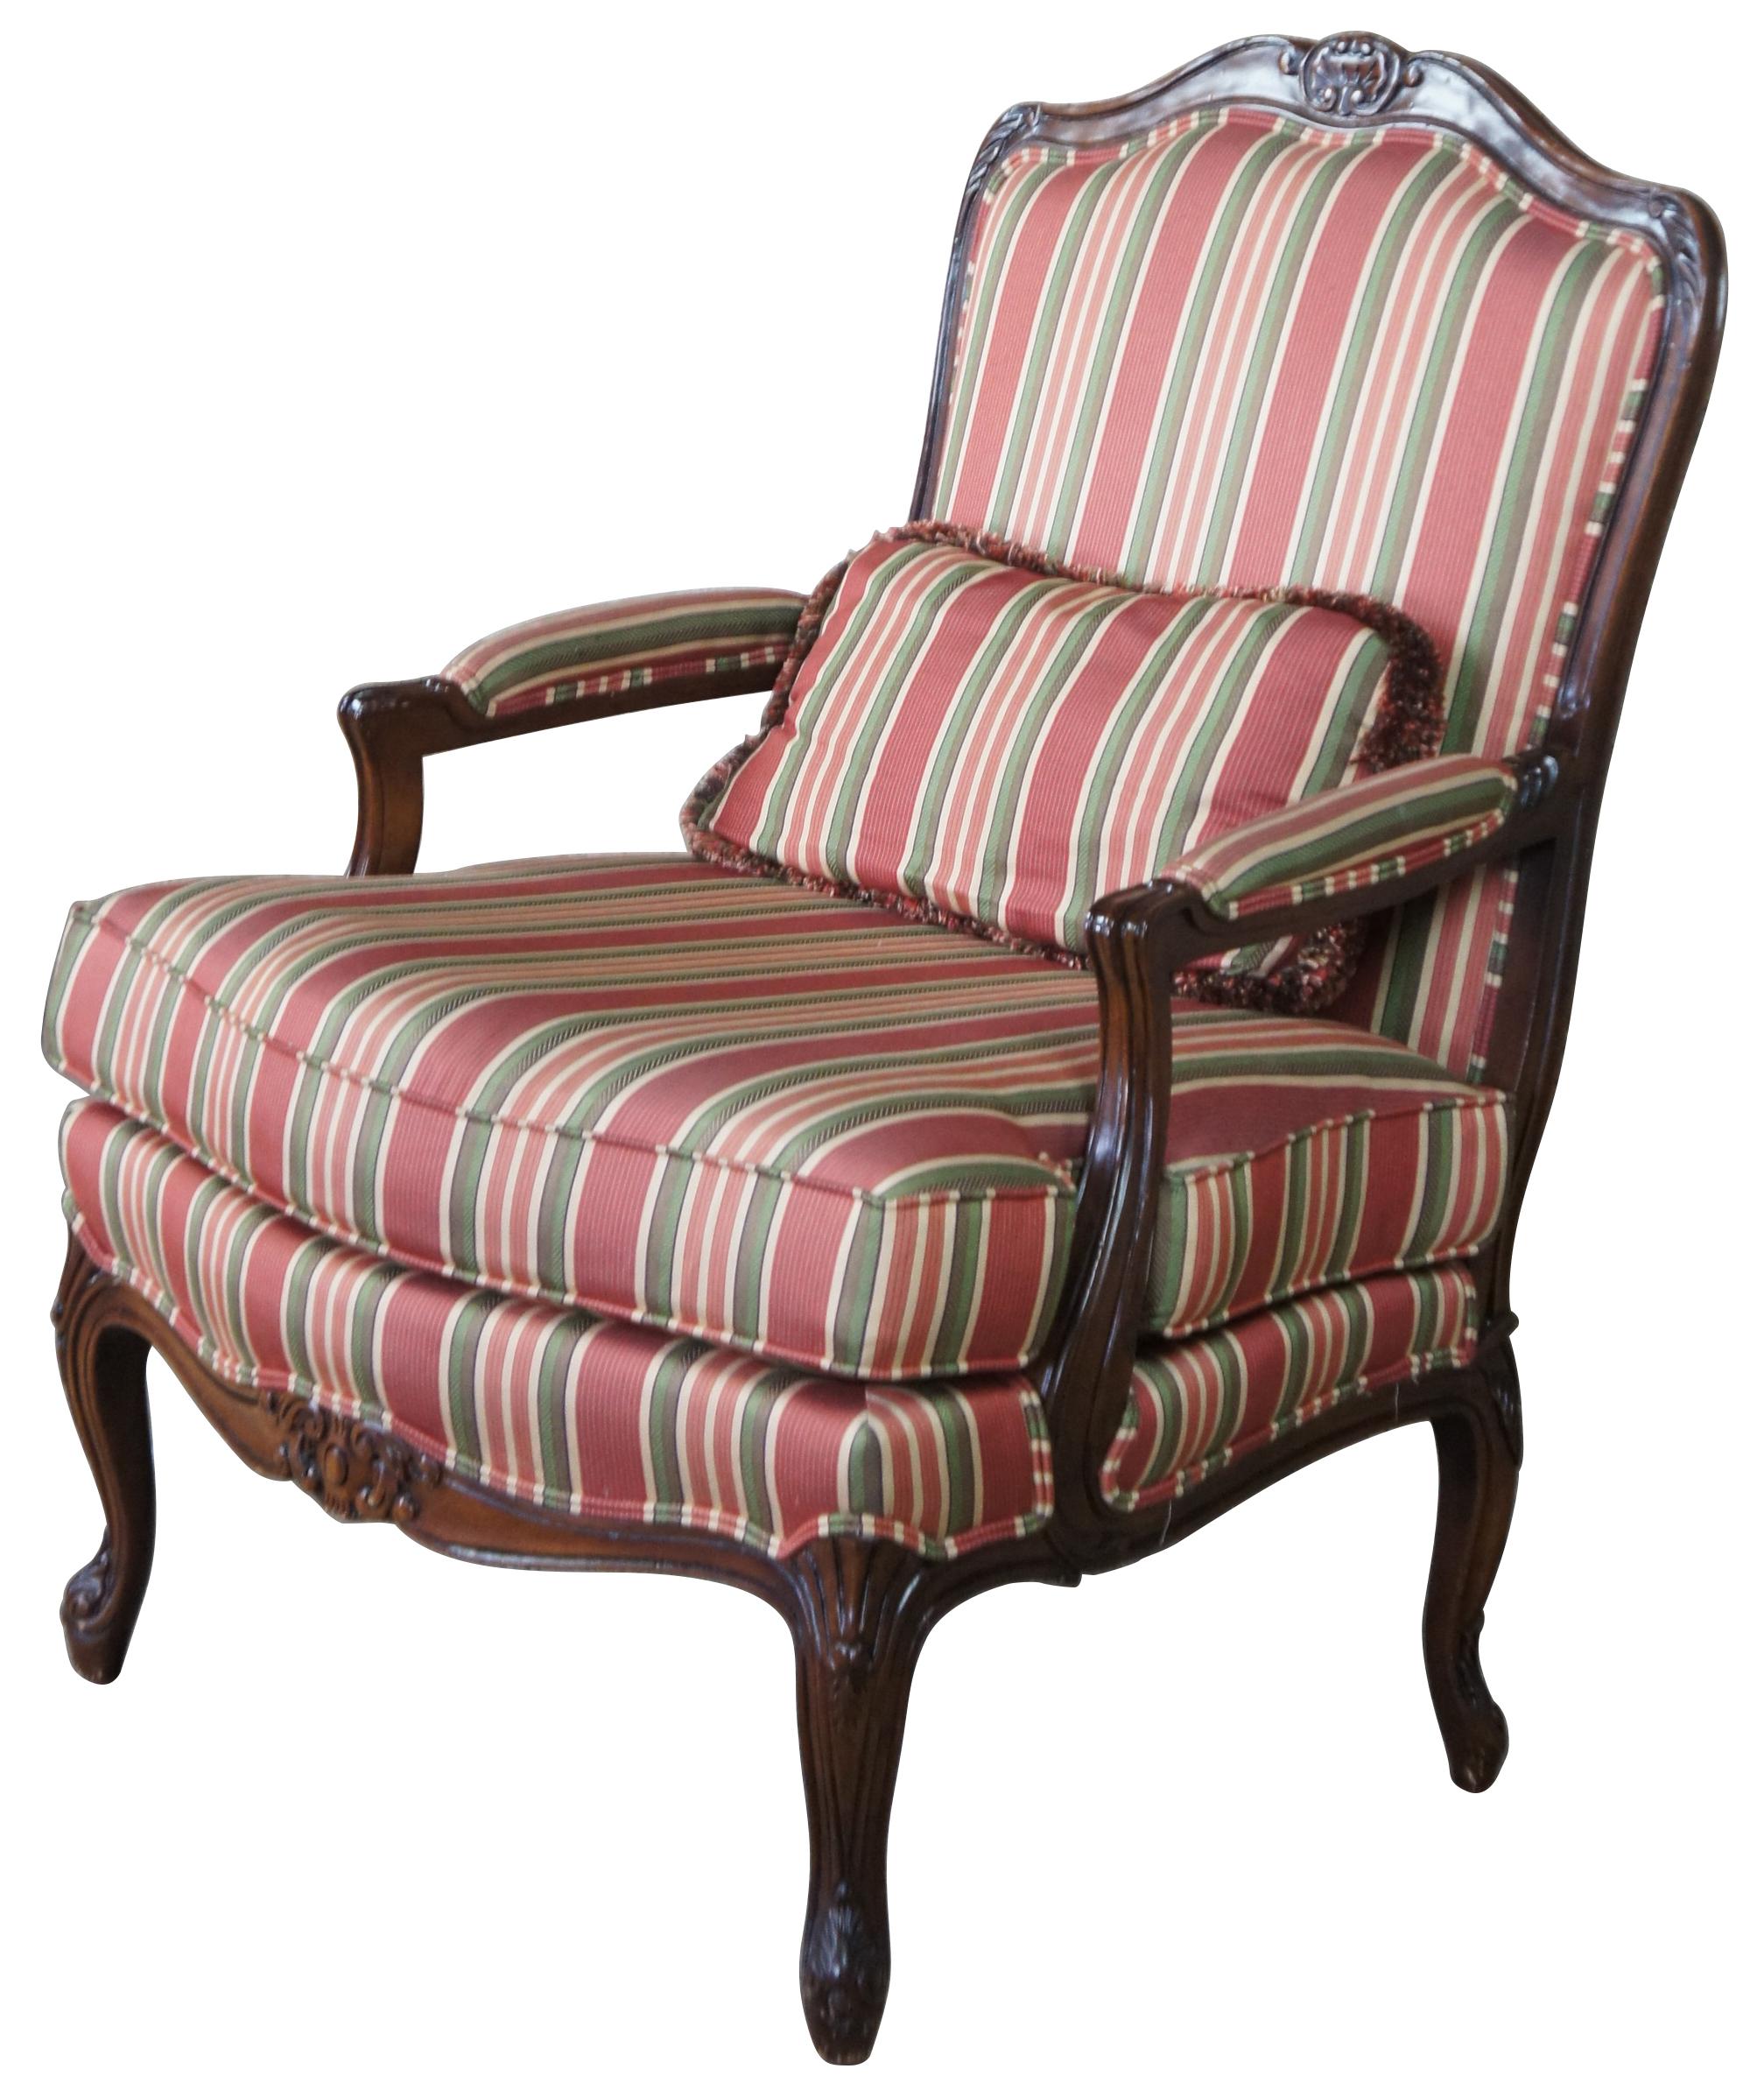 Vintage French Louis XV library club chair. Made of walnut with serpentine form, padded arms, cabriole legs and a striped upholstery accented with double piping. Matching lumbar pillow with fringe included.
 